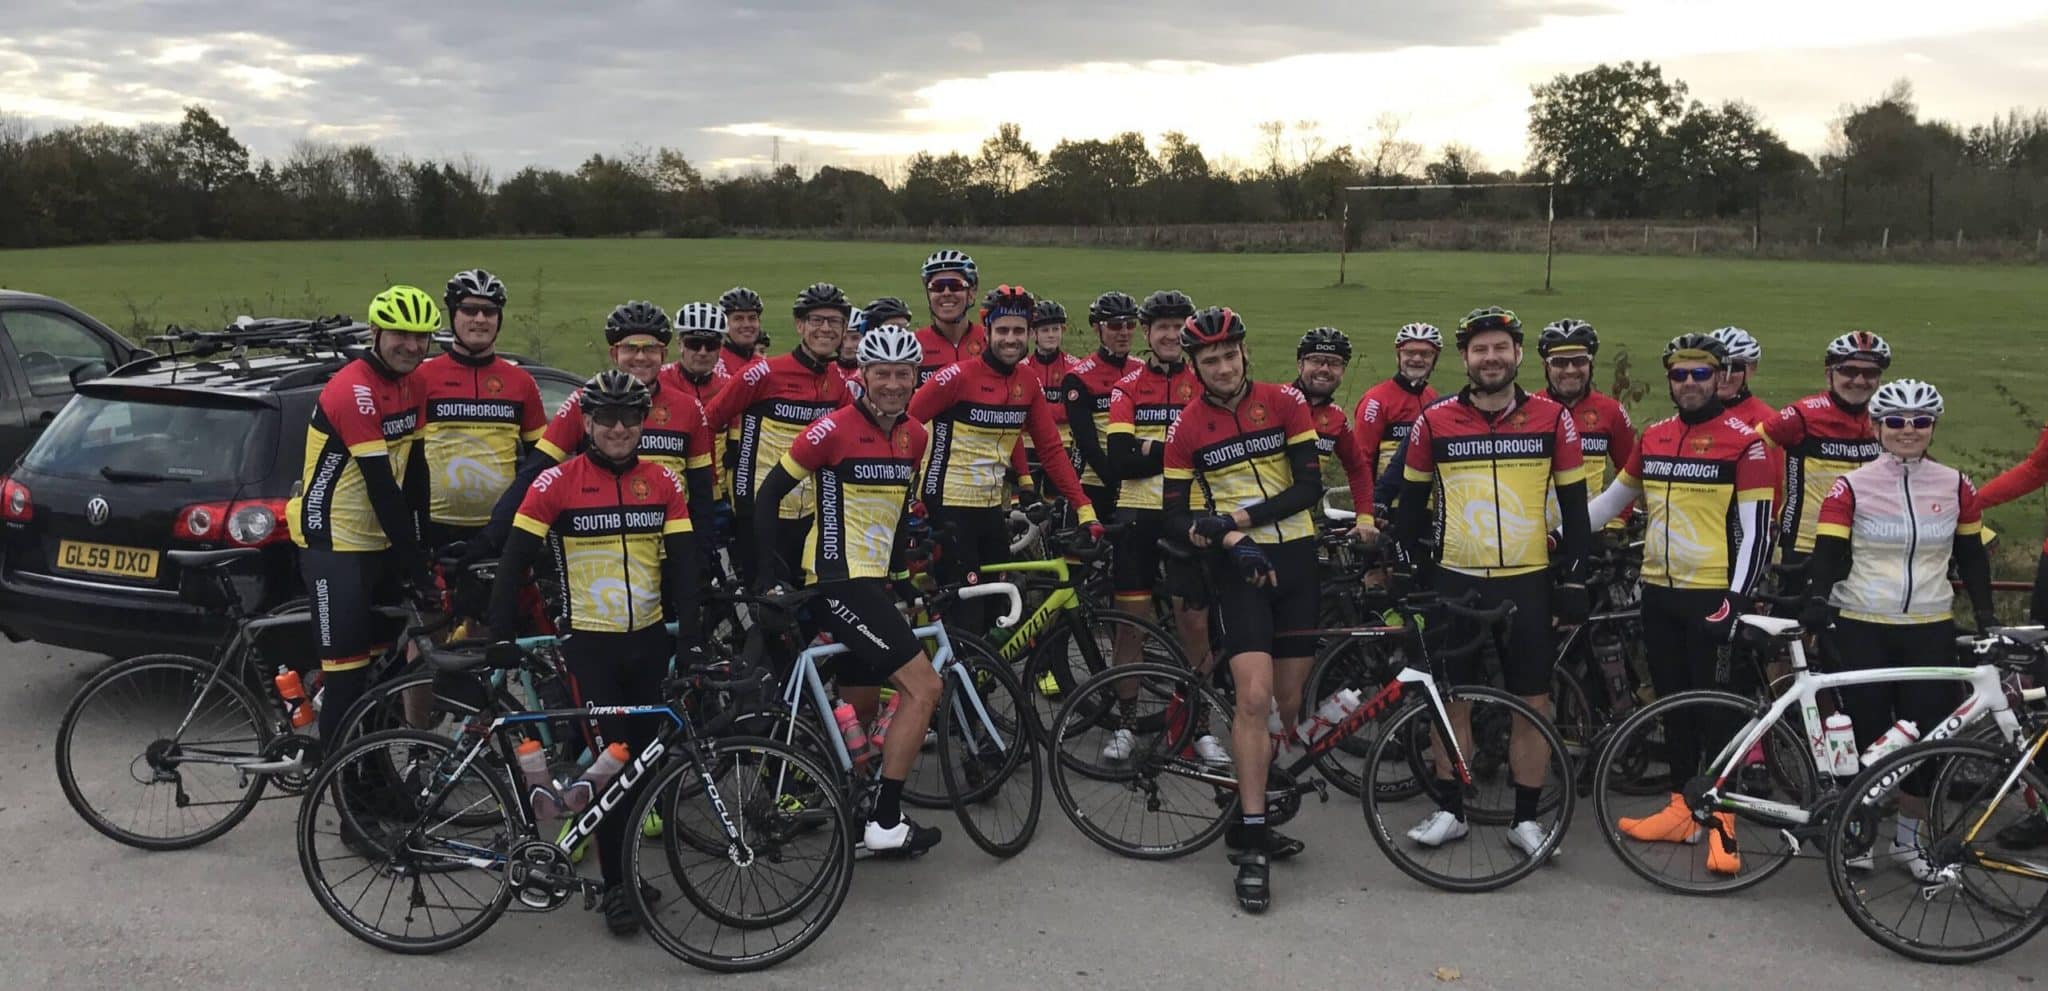 Cycling: Southborough & District Wheelers impress in Kent Reliability trial